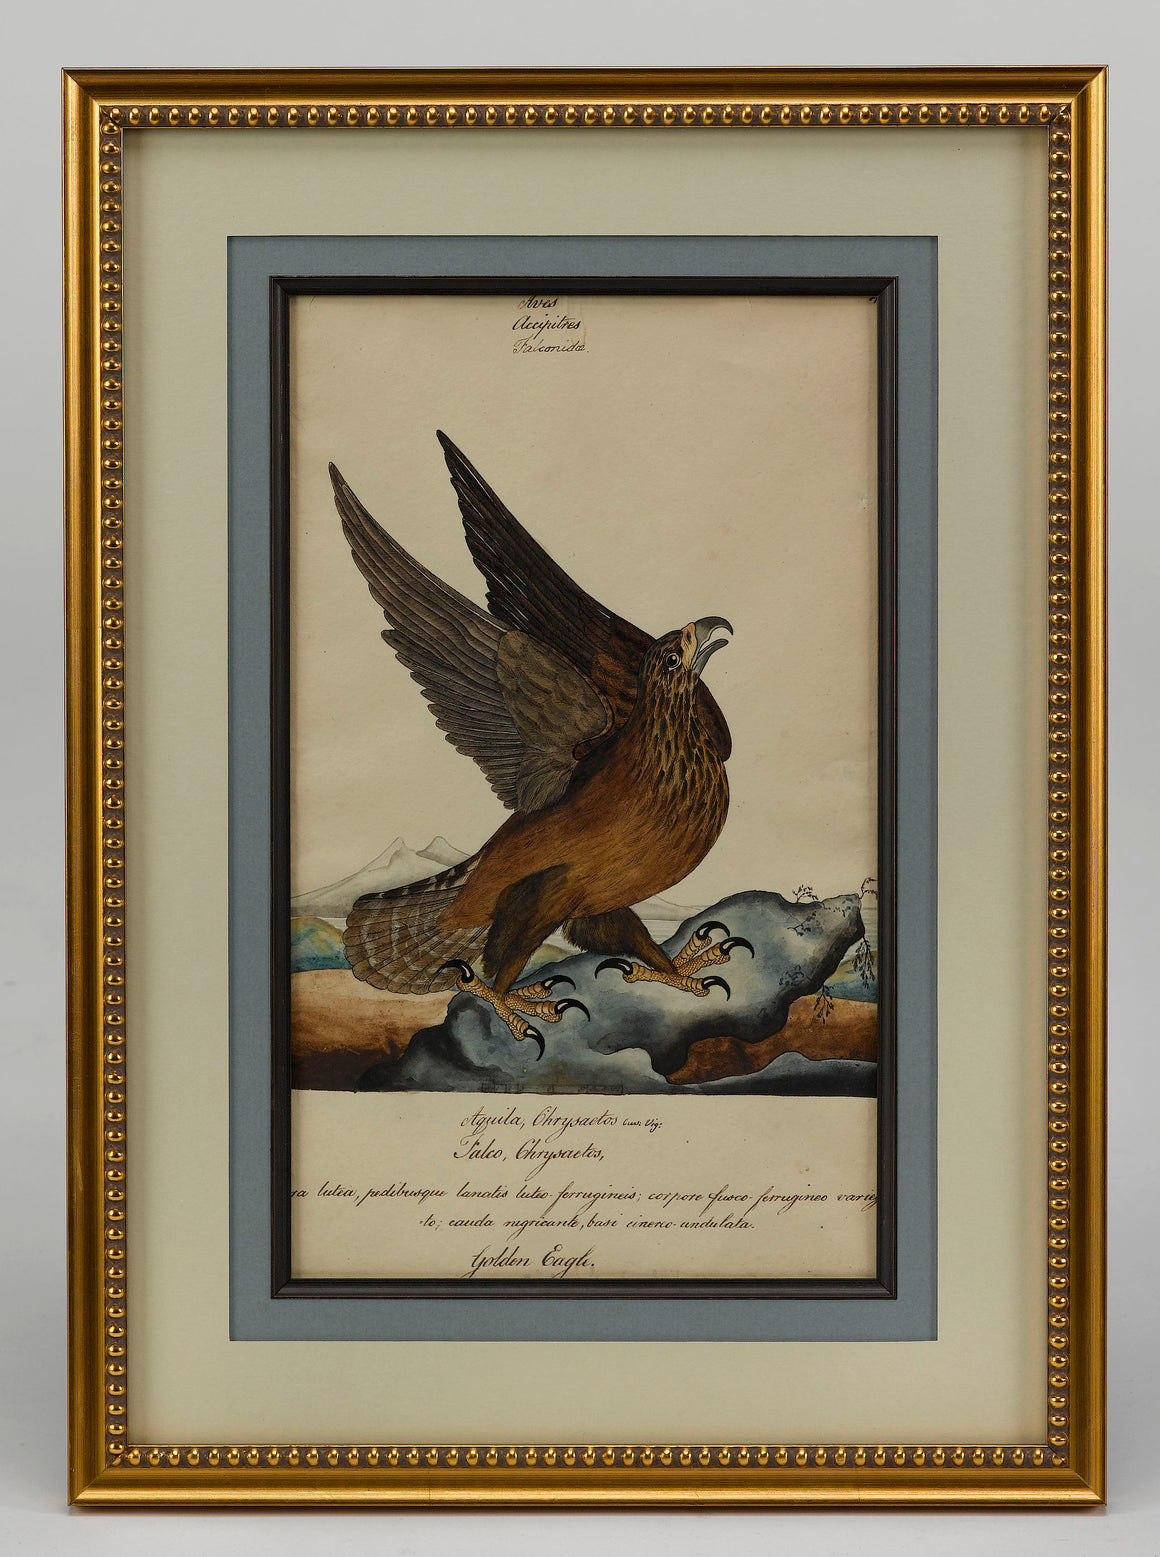 "Golden Eagle" by William Goodall, Watercolor and Ink Drawing, Early 19th Century